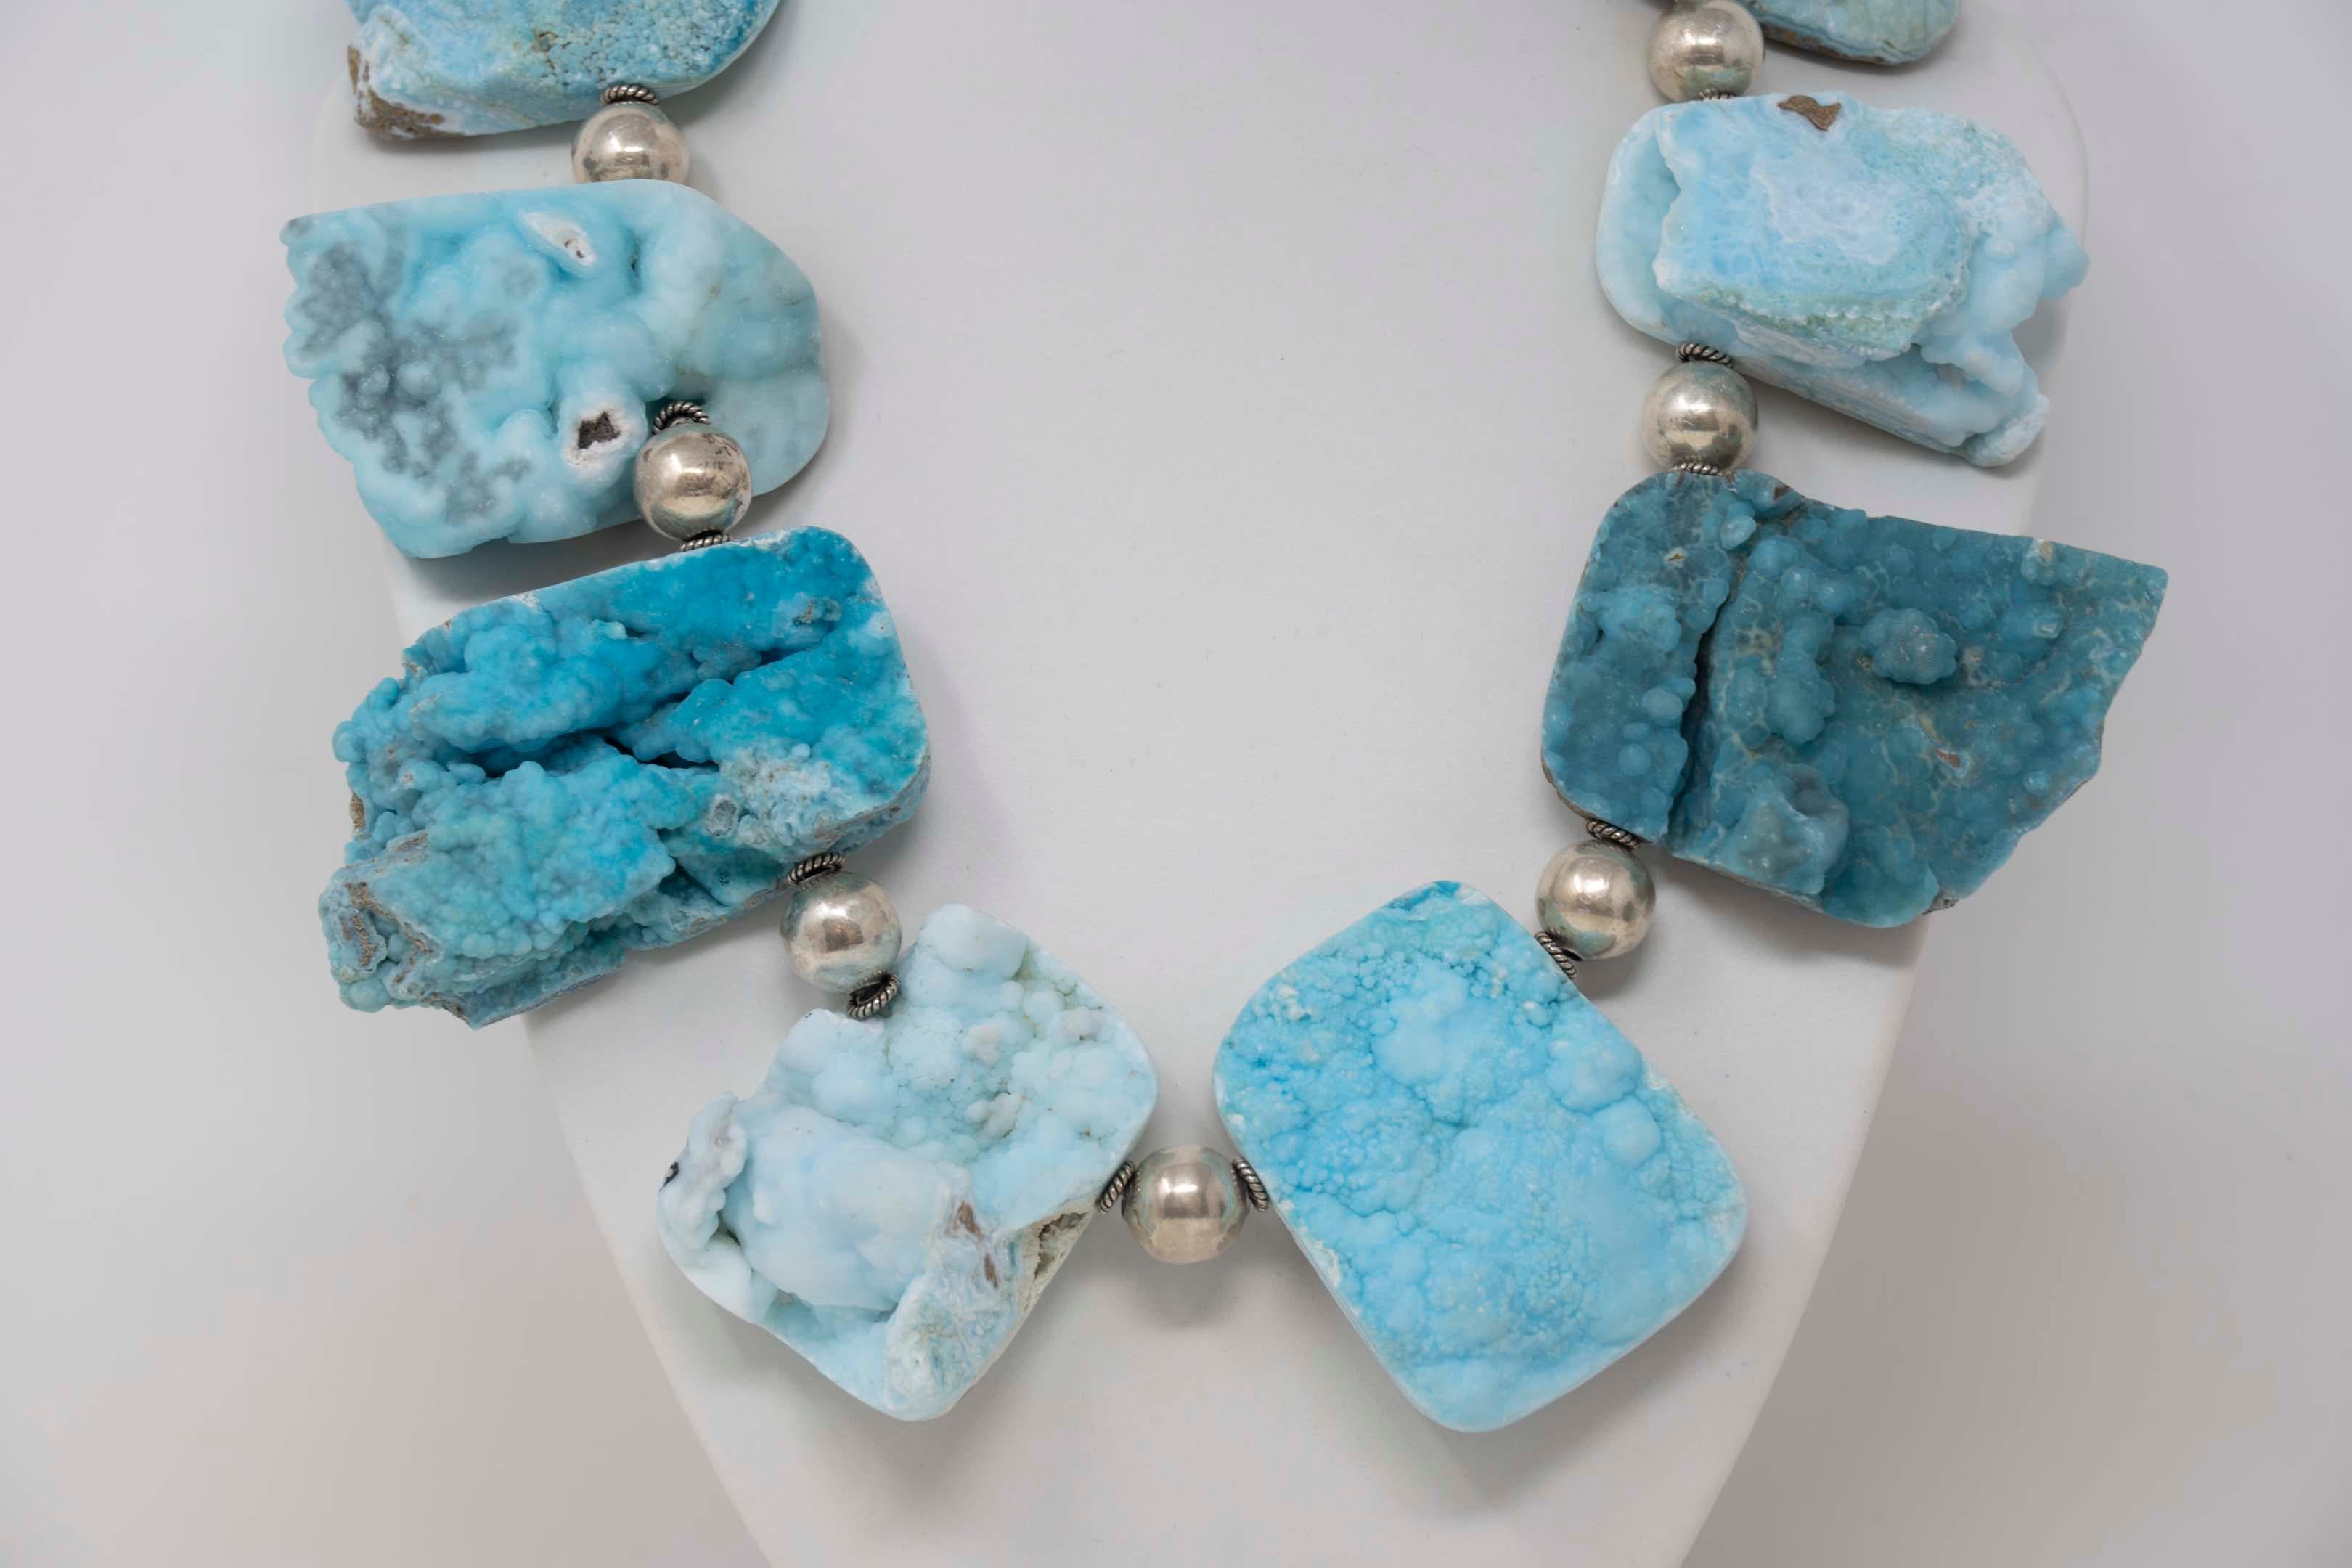 Natural turquoise druzy quartz and sterling silver necklace signed E.M.S. 925 AG “Anna K.” Measures about 18 1/2 inches long.
